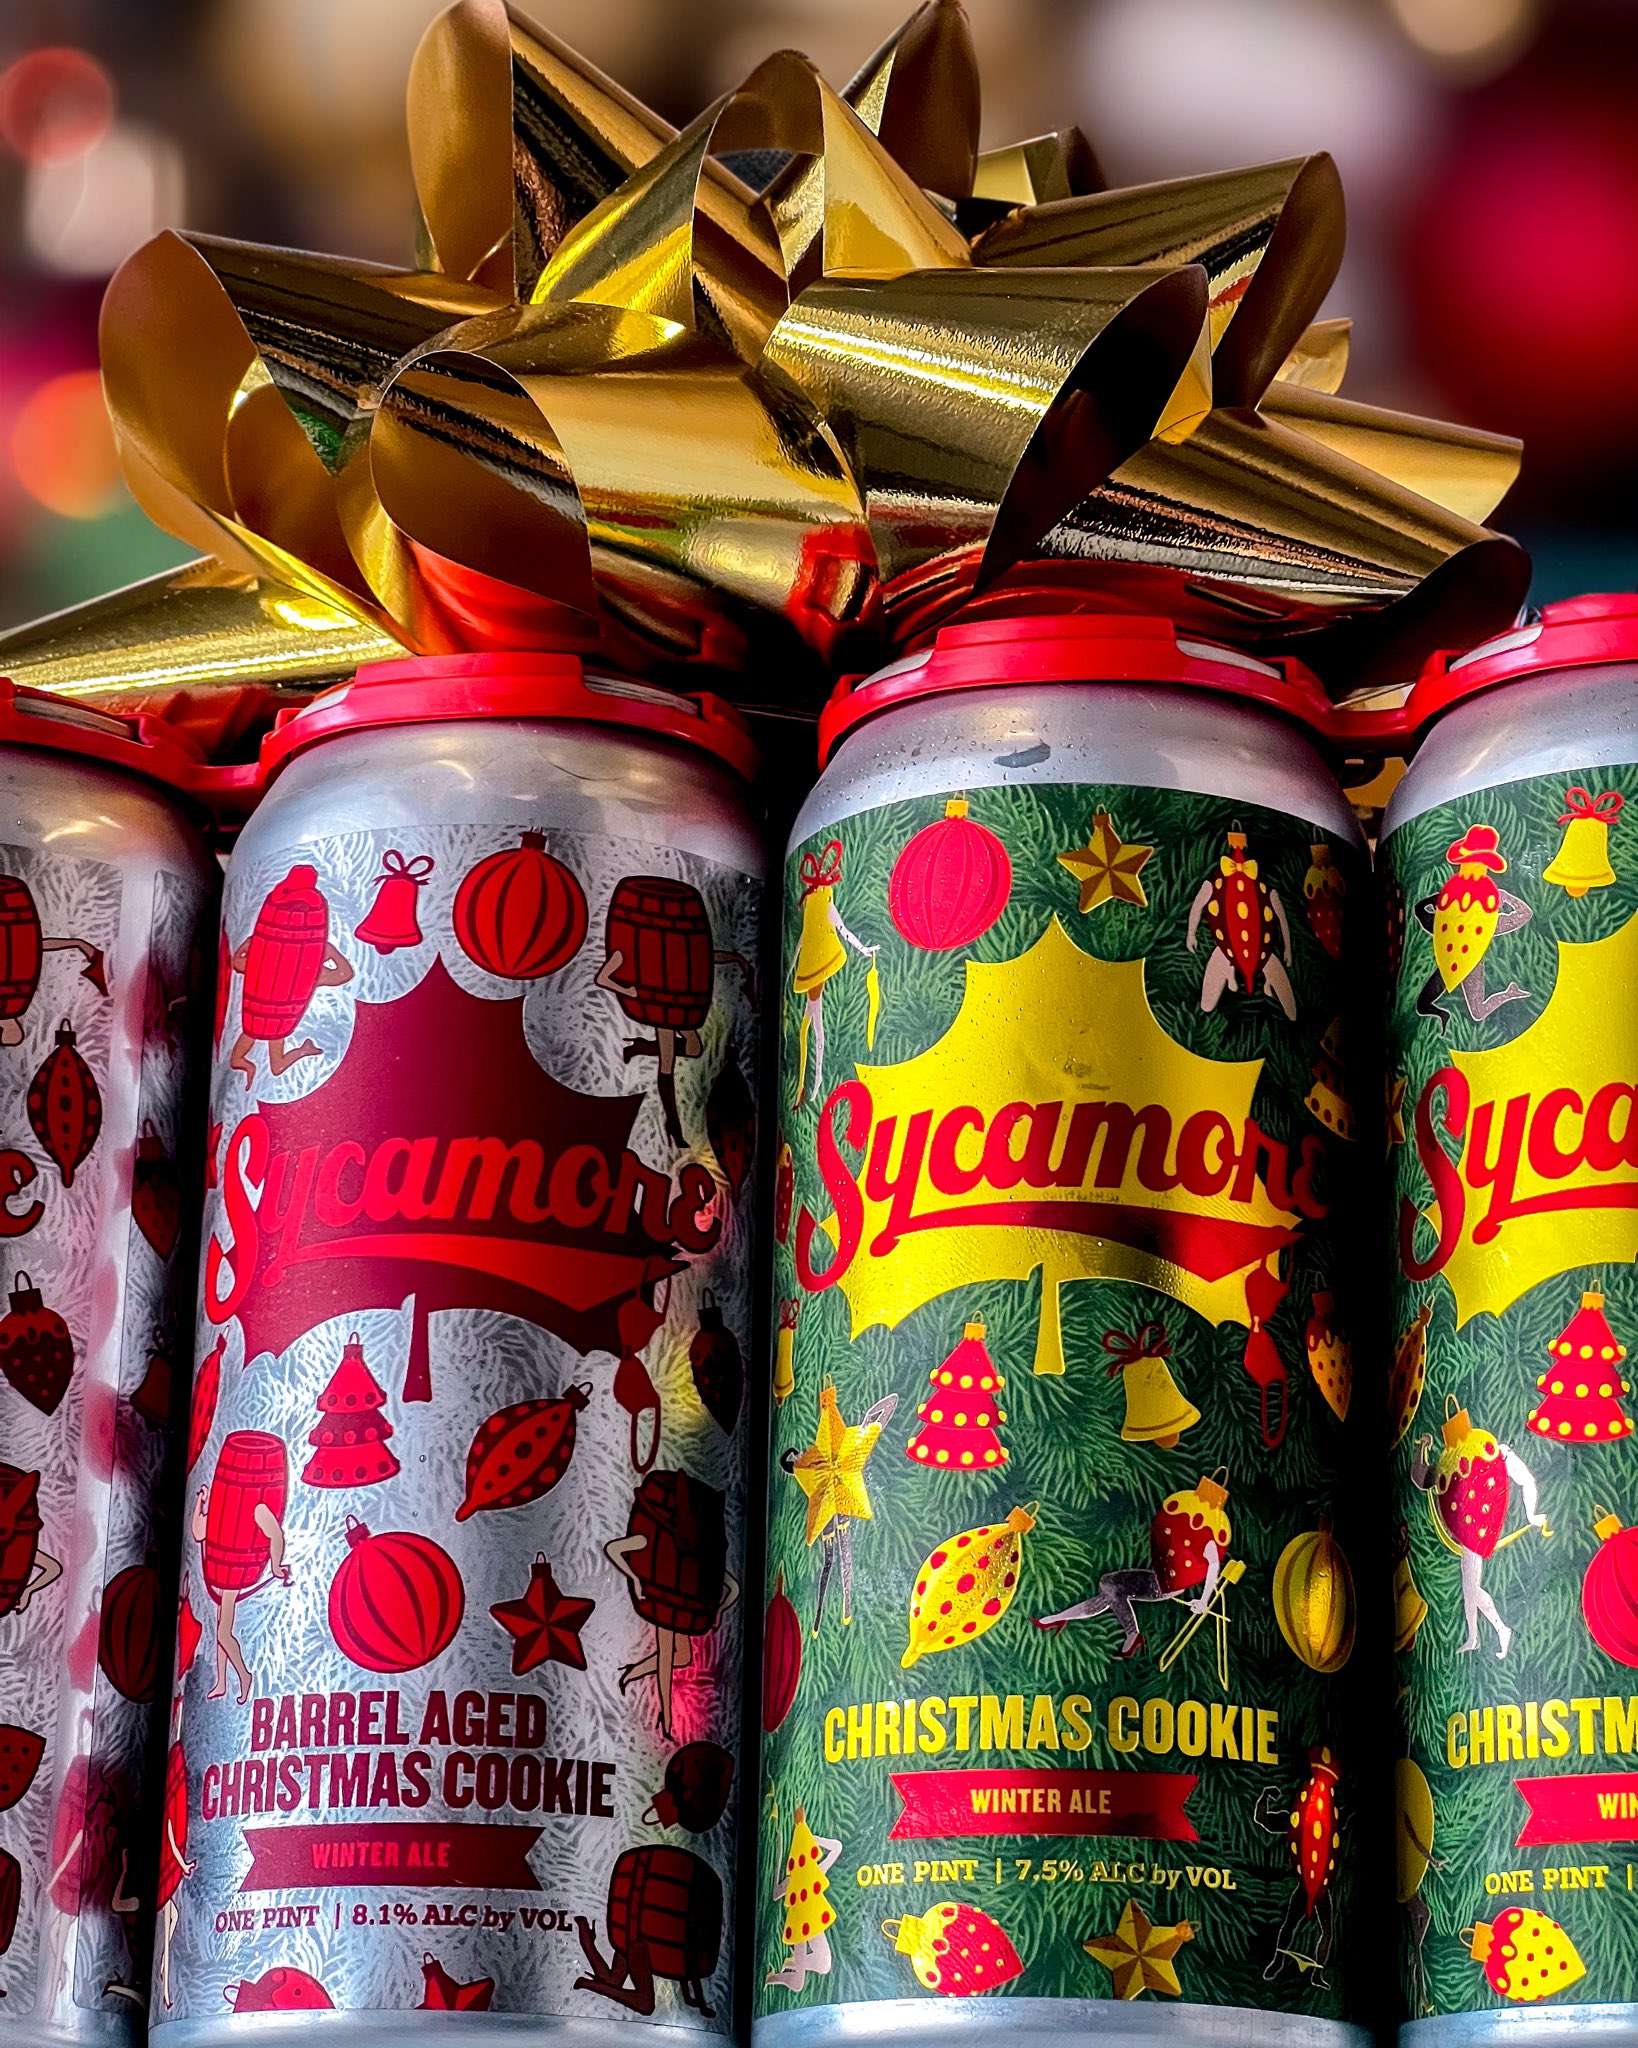 Sycamore Brewing Co. releases naughty Christmas beer can